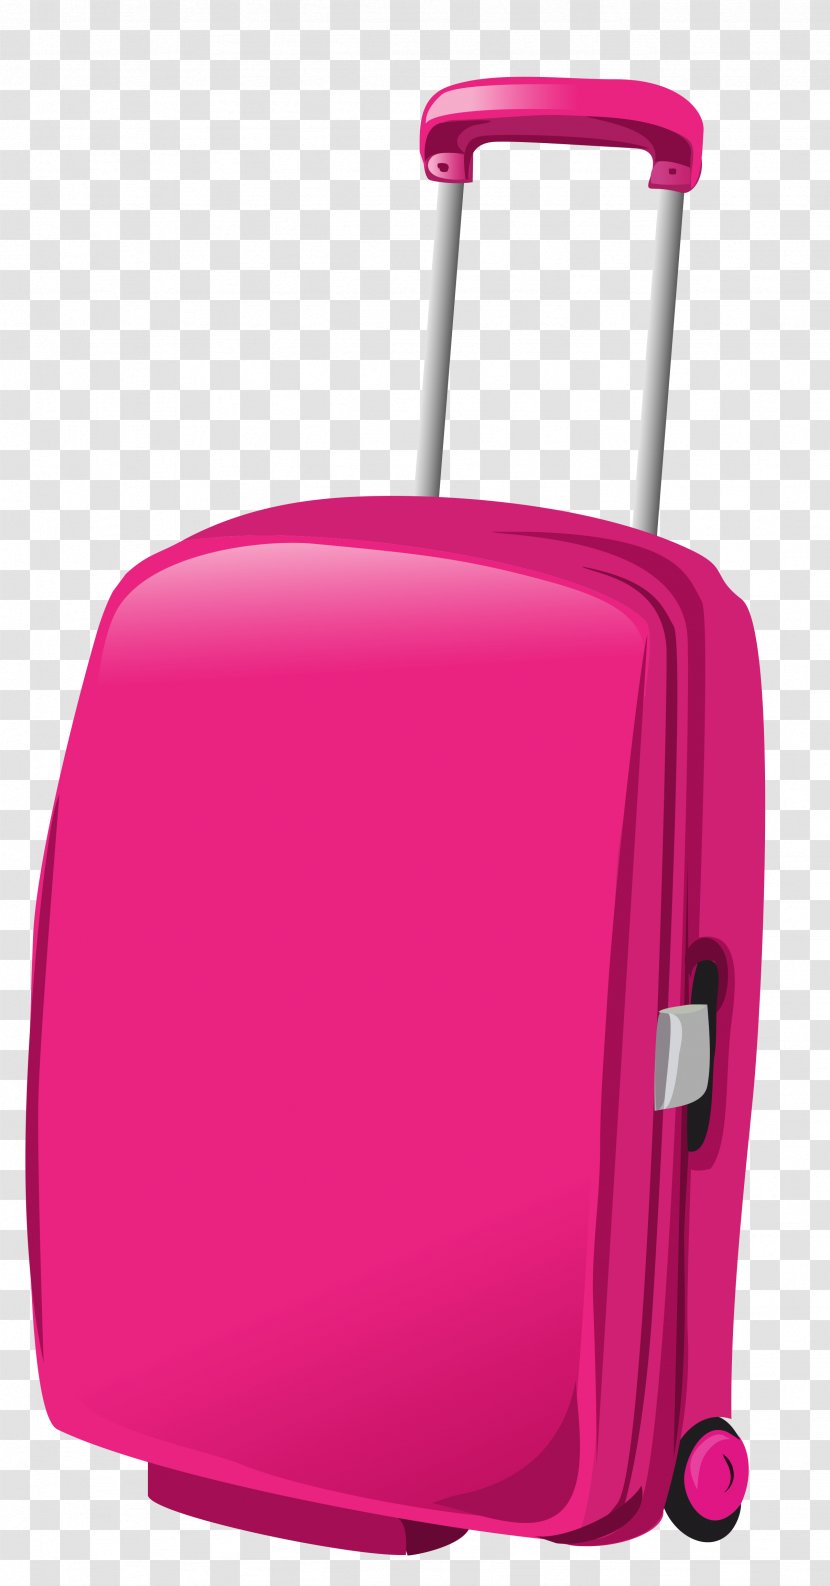 Suitcase Baggage Travel Pink Clip Art - Magenta - Bag Clipart Picture Transparent PNG